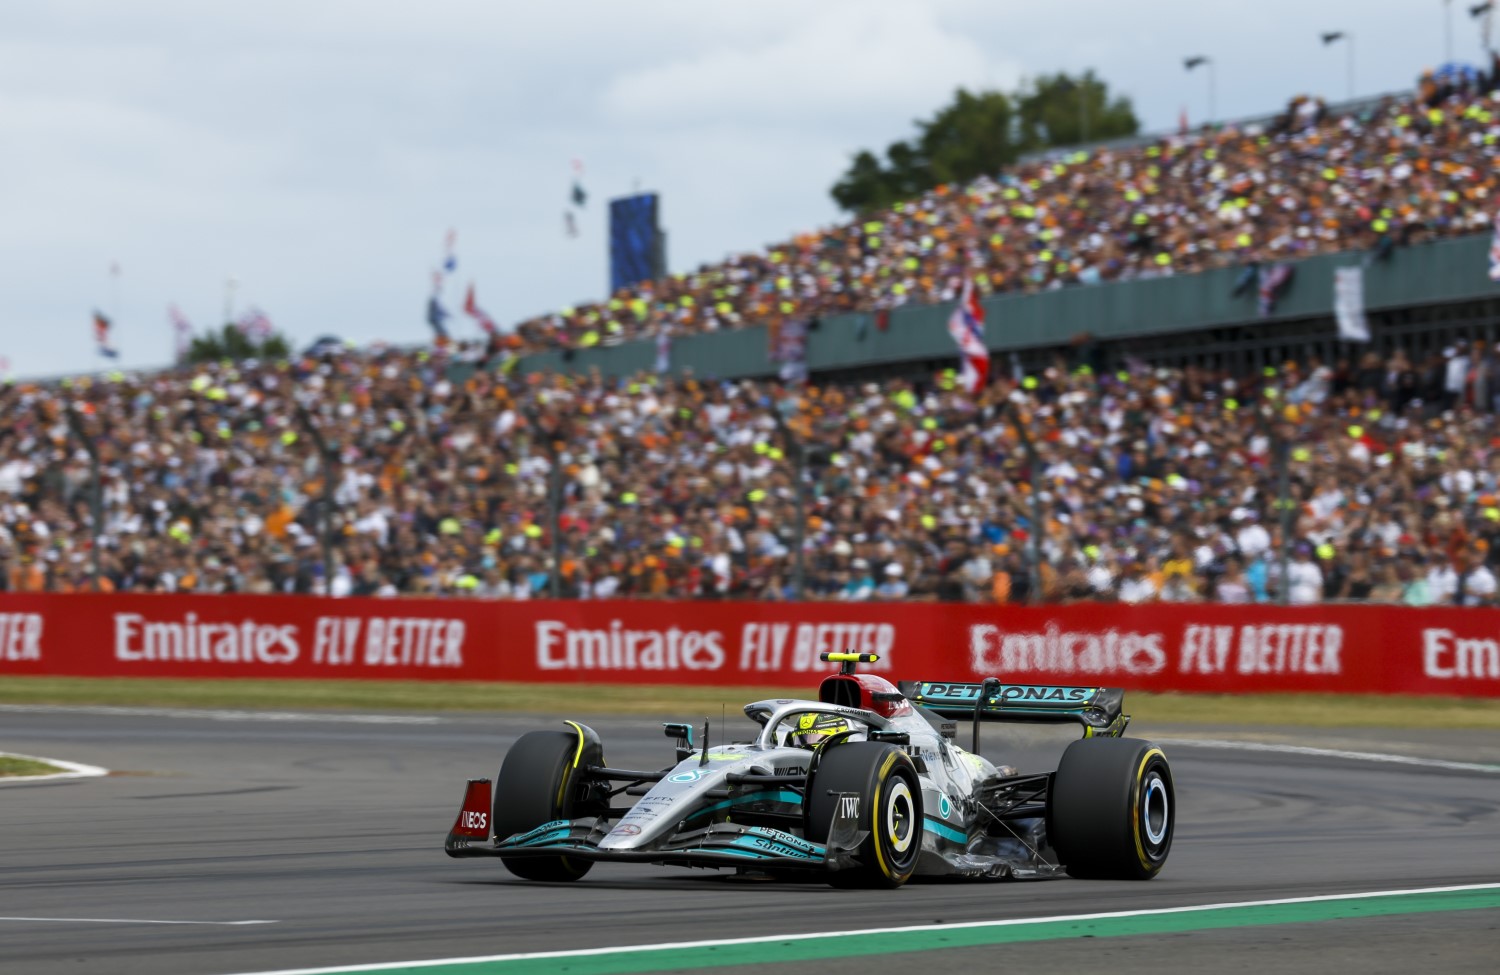 F1 British GP ticket prices to increase based on demand